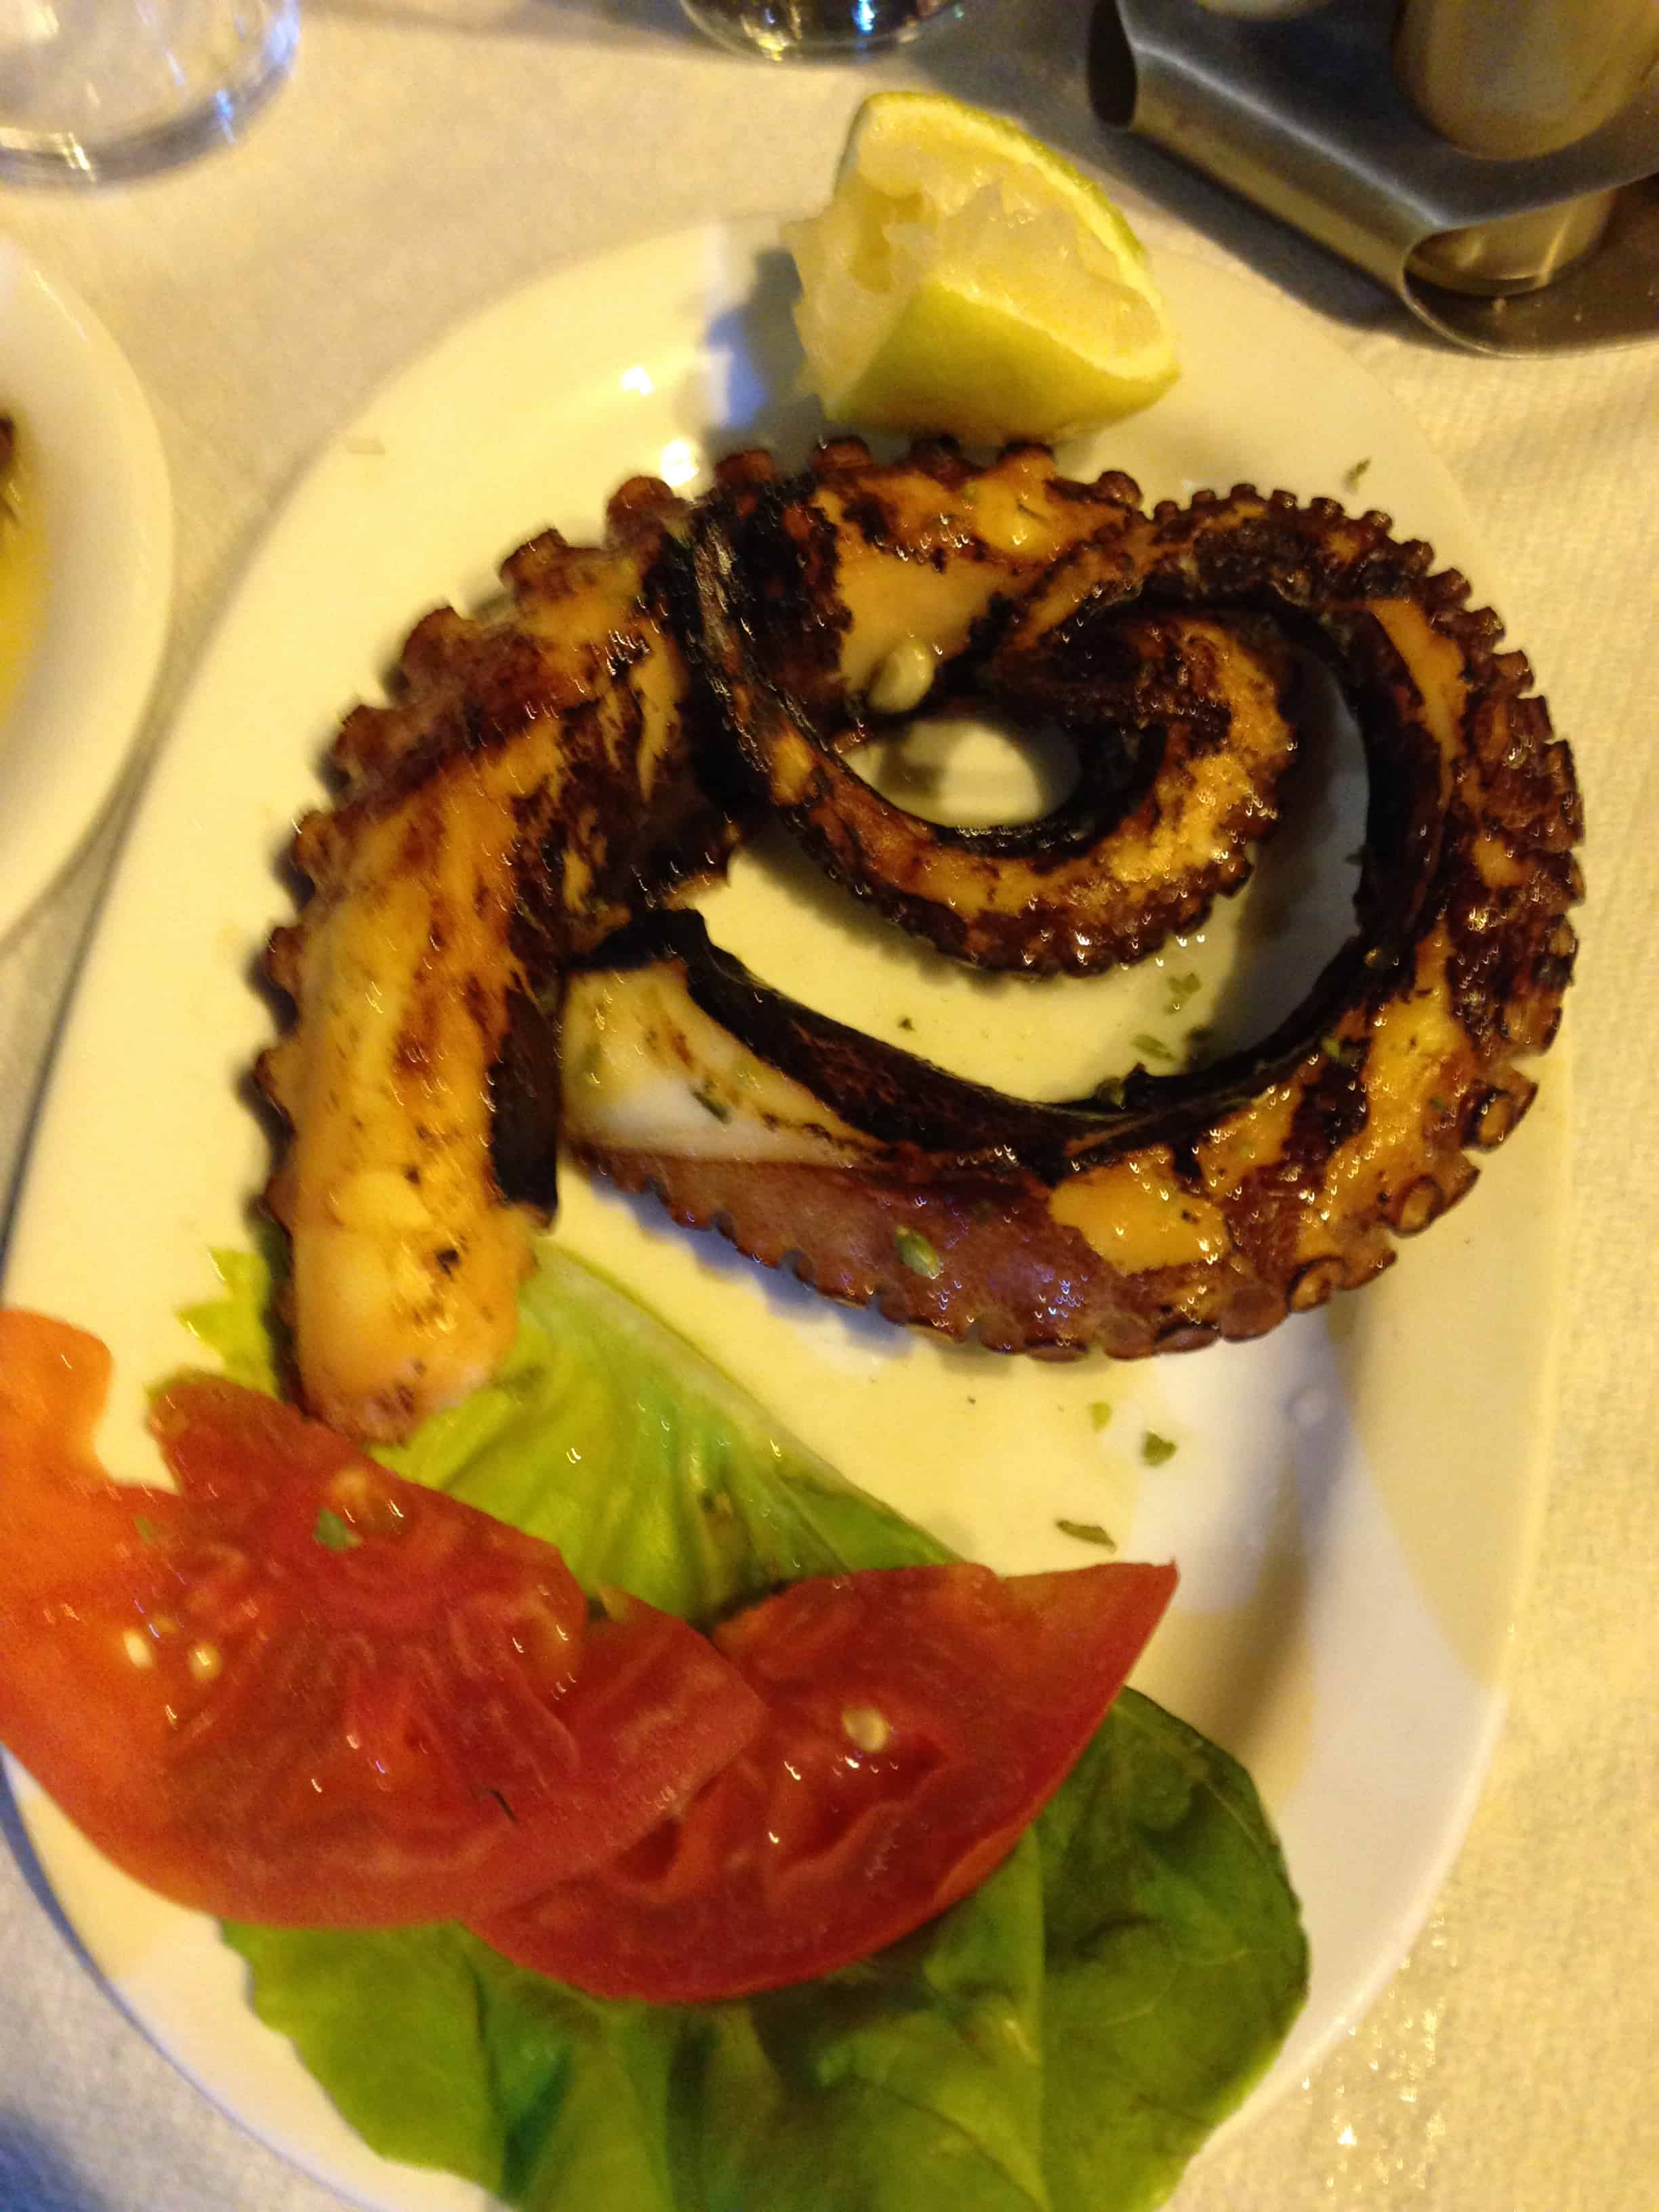 Octopus at To Tsikoudo in Chora, Chios, Greece